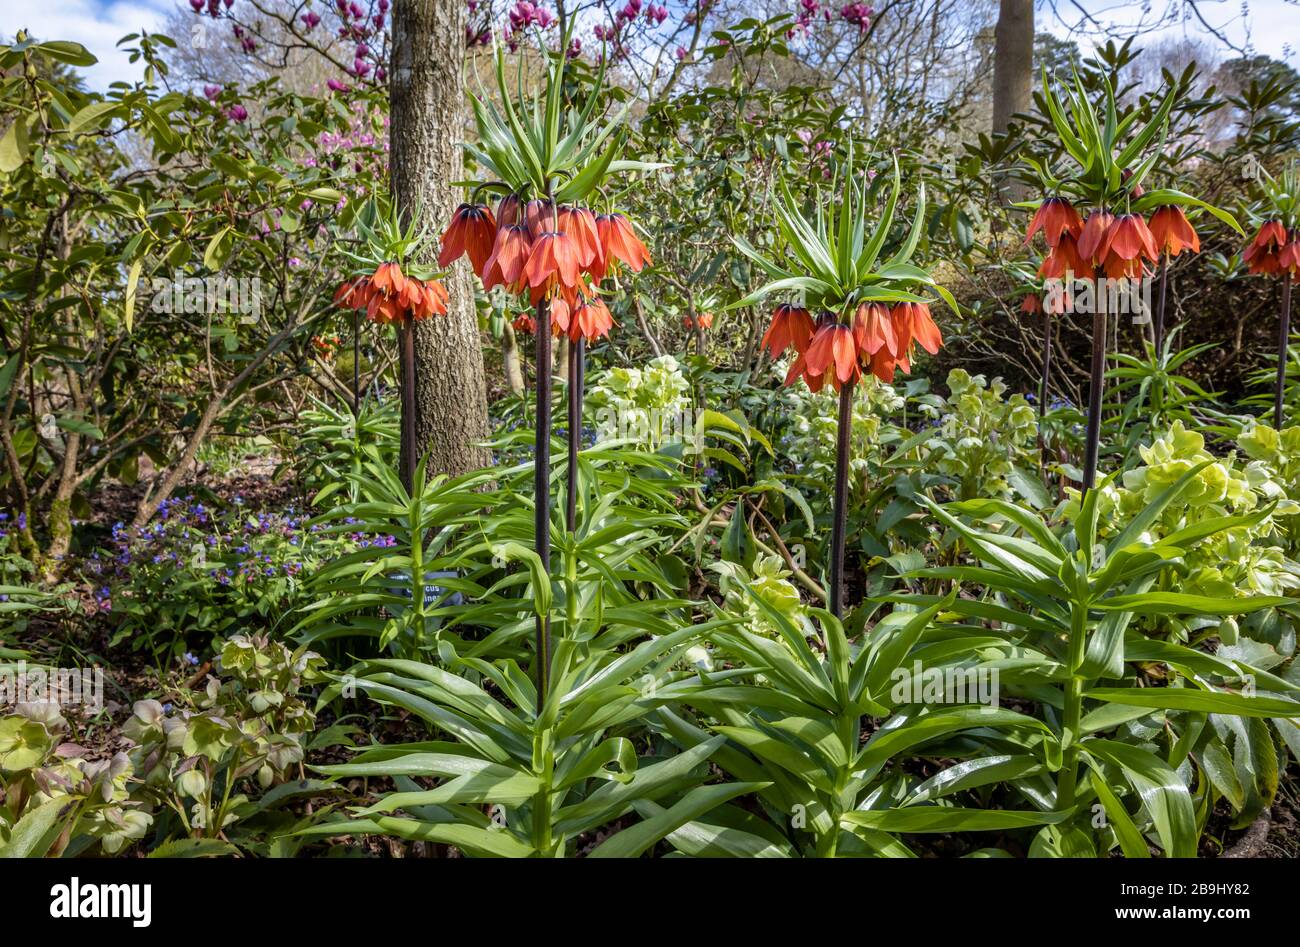 Tall Red Fritillaria Imperialis Crown Imperial Fritillary Rubra With Large Bell Shaped Flowers Flowering In Rhs Garden Wisley Surrey In Spring Stock Photo Alamy